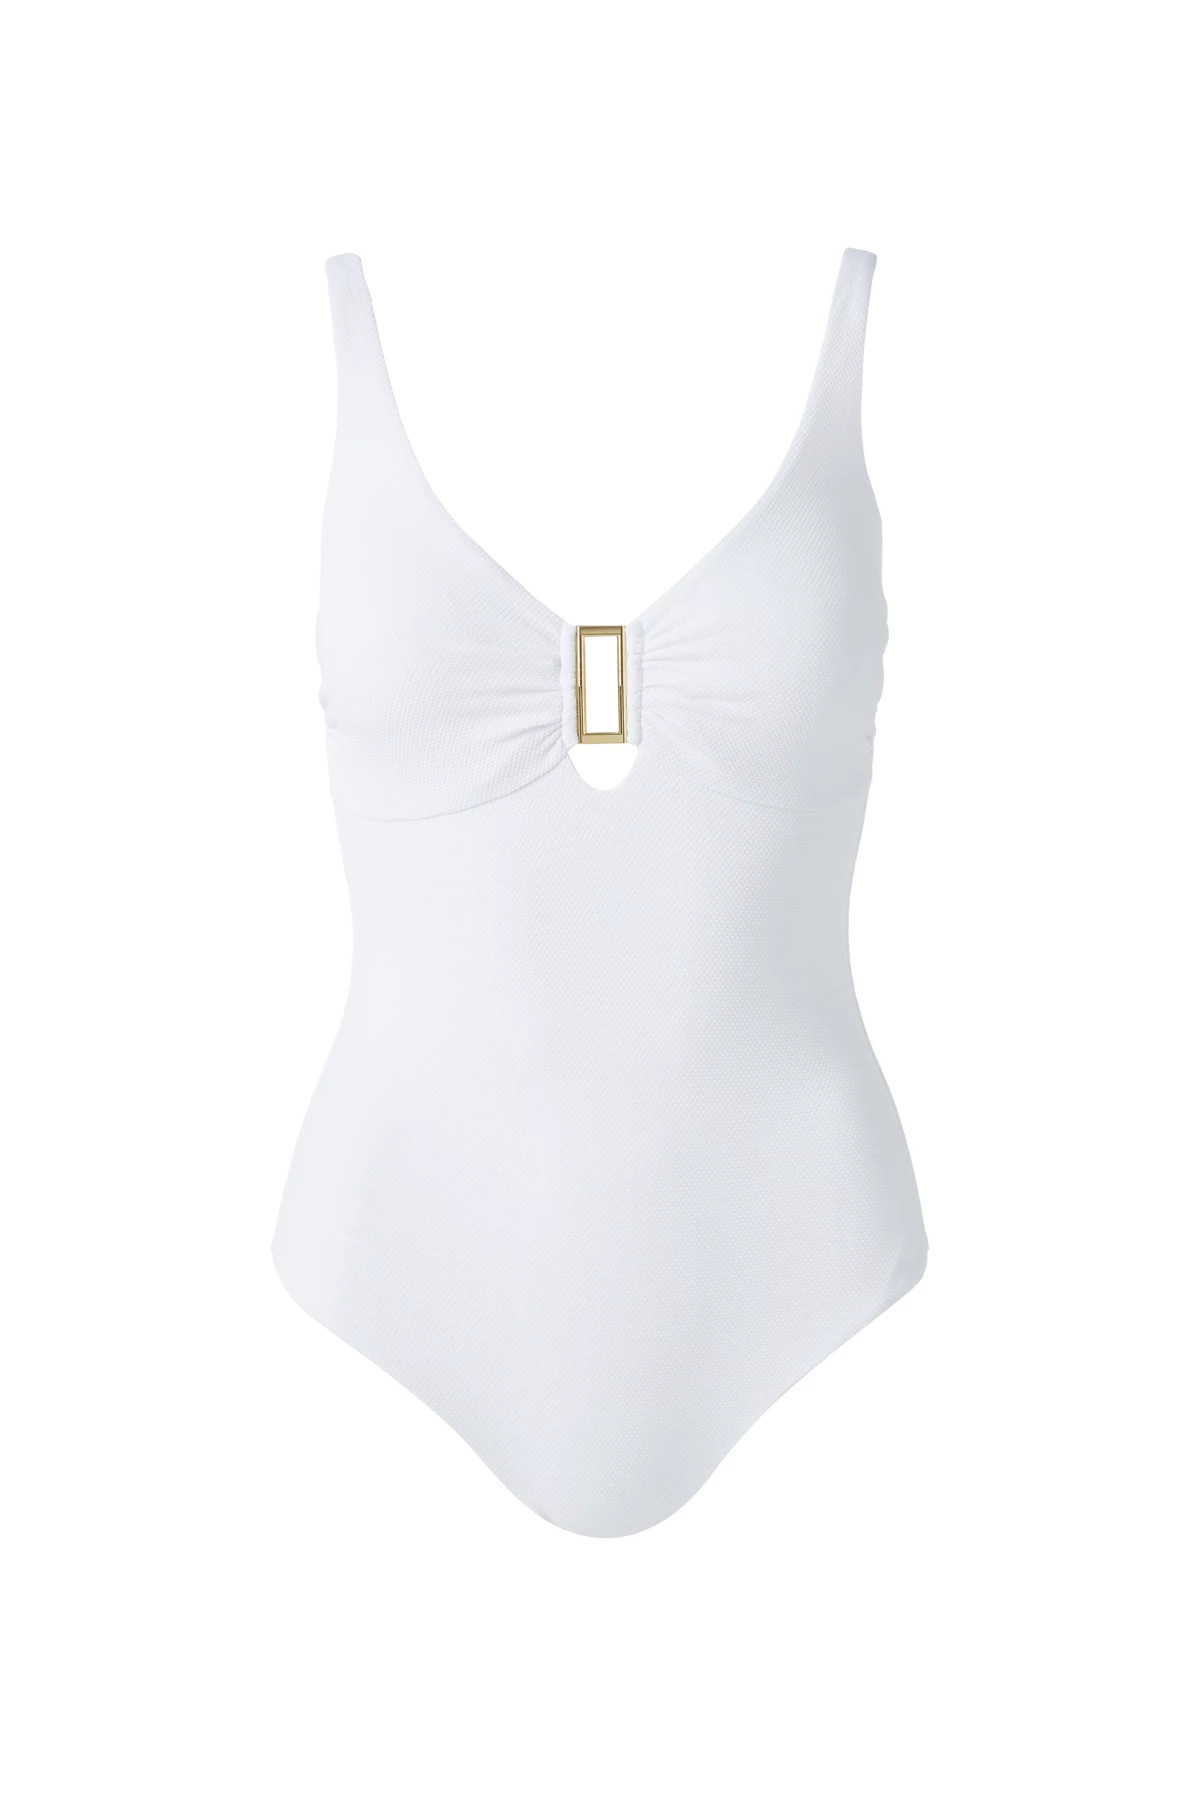 WHITE PIQUE Tuscany One Piece Swimsuit image number 4